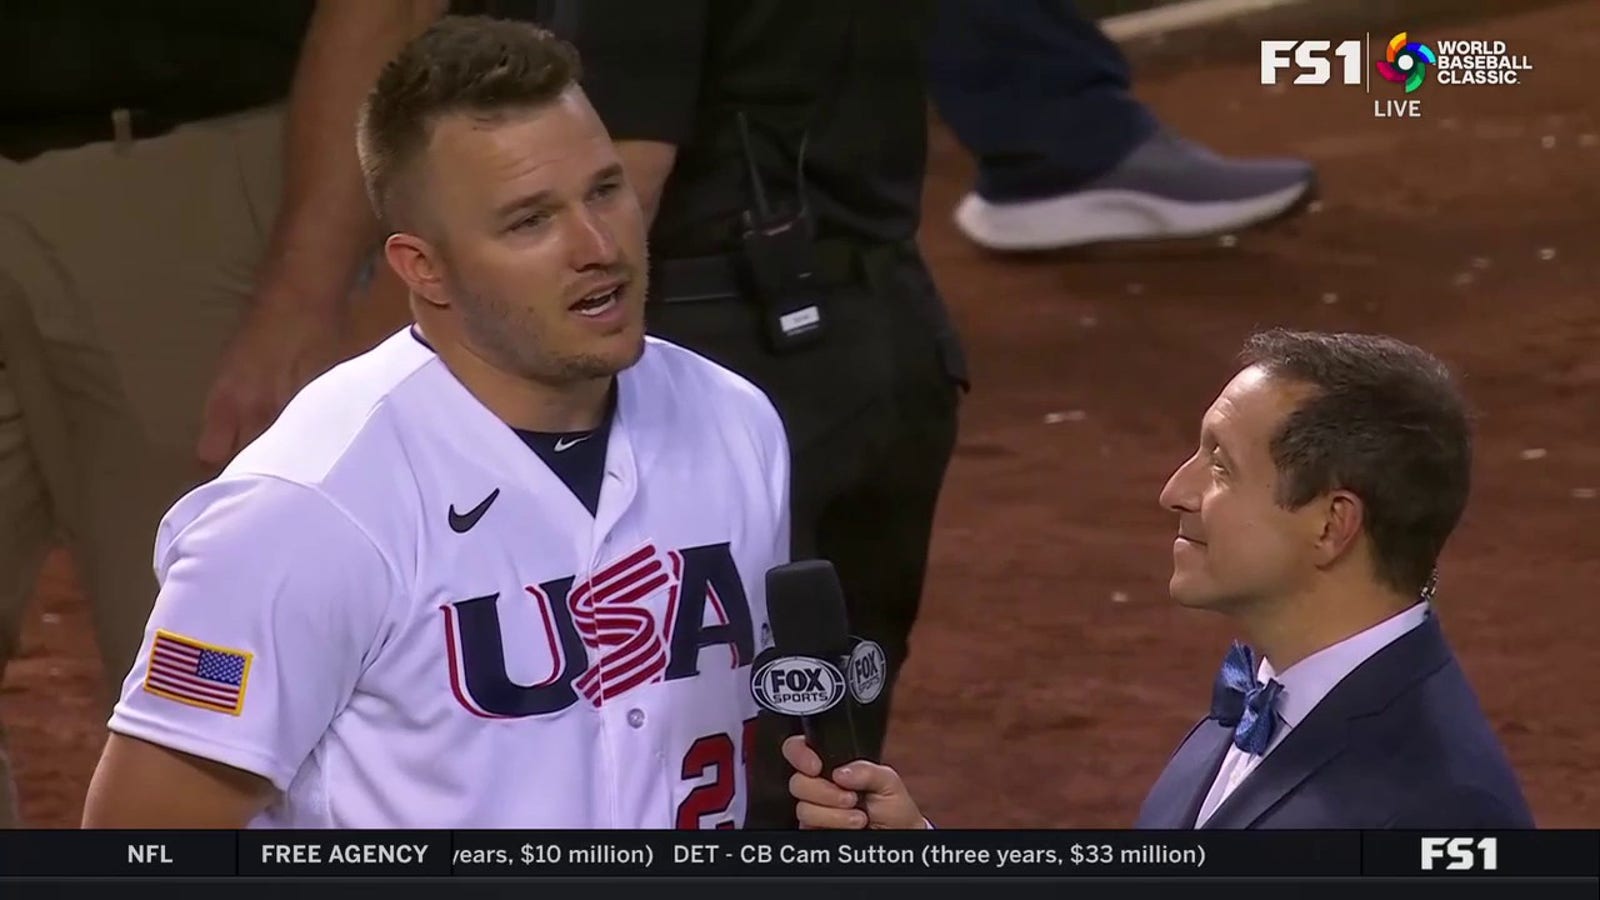 Mike Trout talks to Ken Rosenthal after the USA defeats Canada 12-1